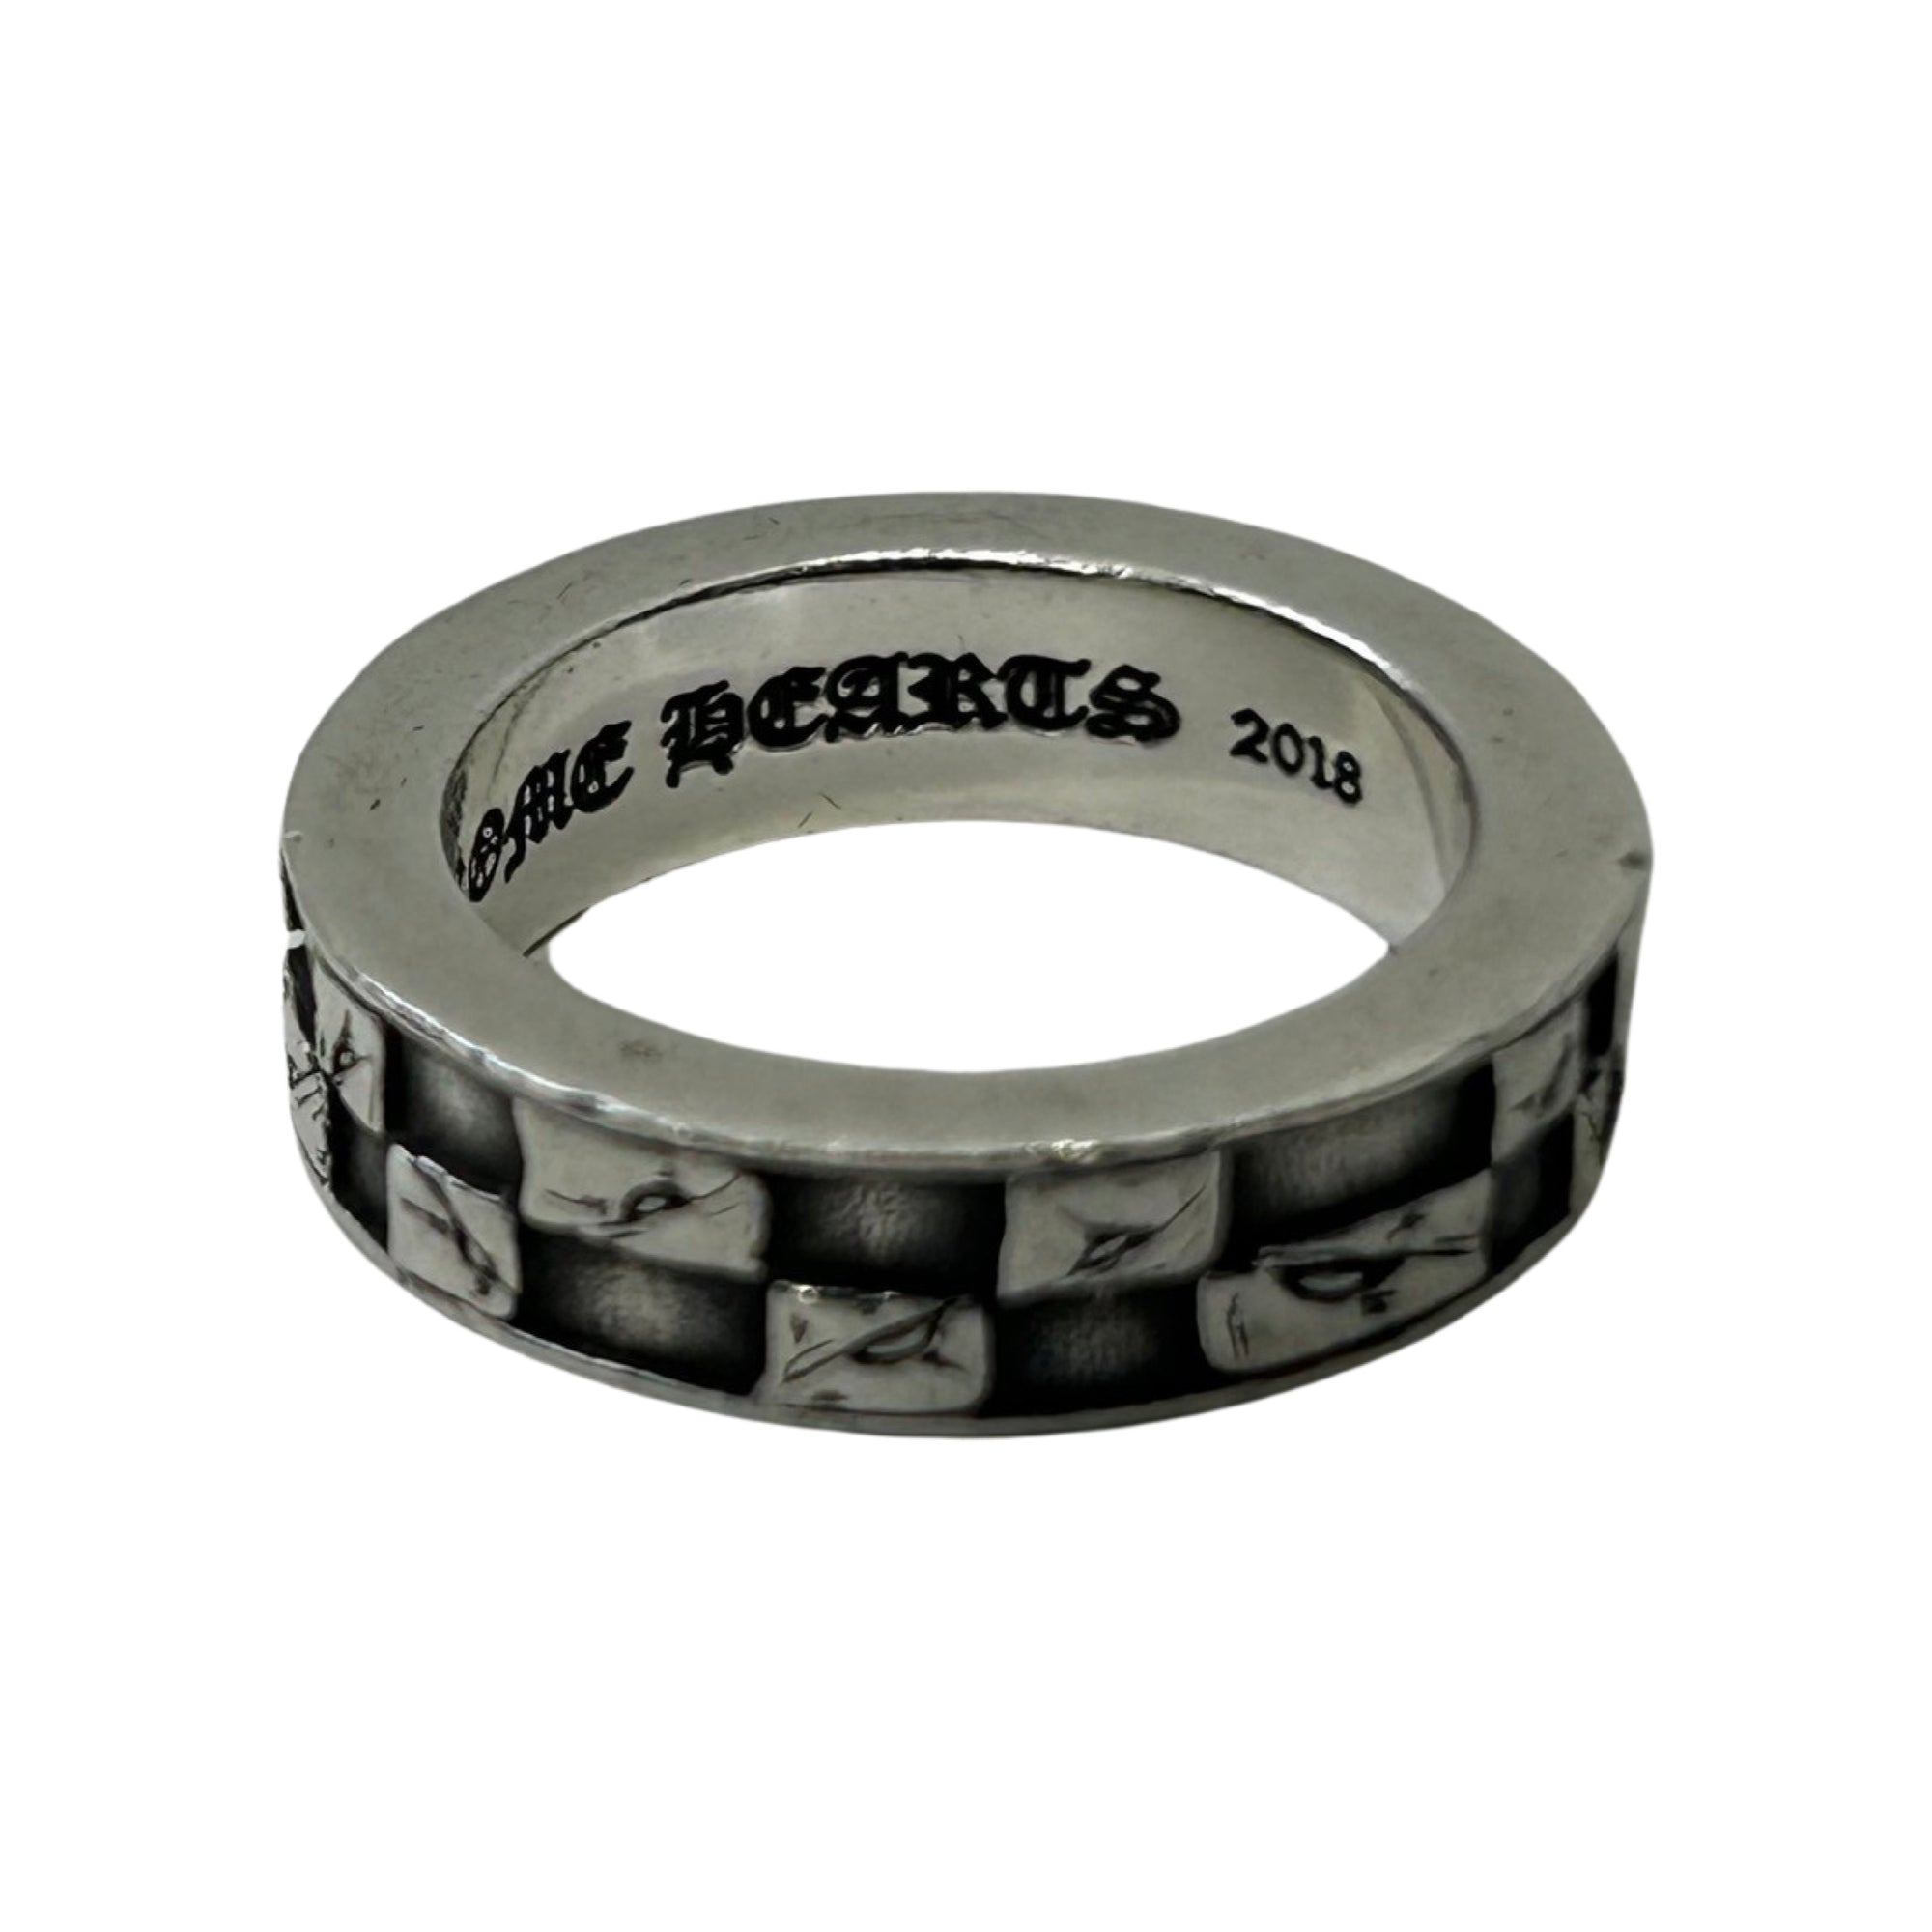 CHROME HEARTS MB 99 EYES 6MM SPACER